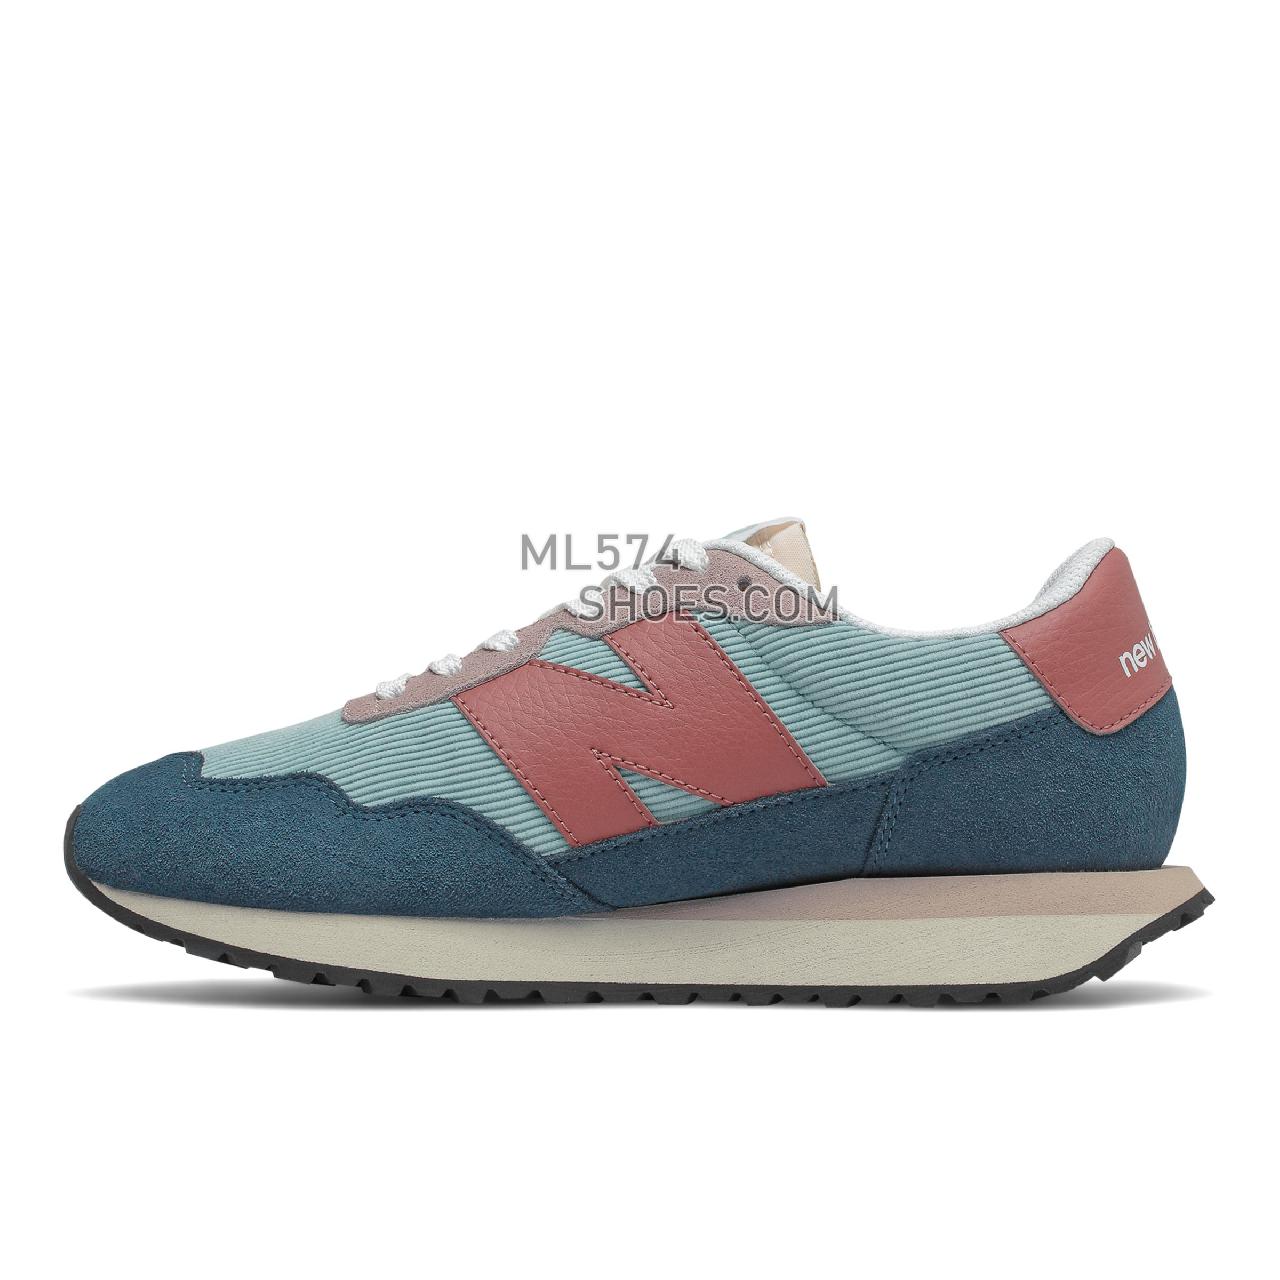 New Balance 237 - Women's Classic Sneakers - Lagoon with Washed Henna - WS237WA1